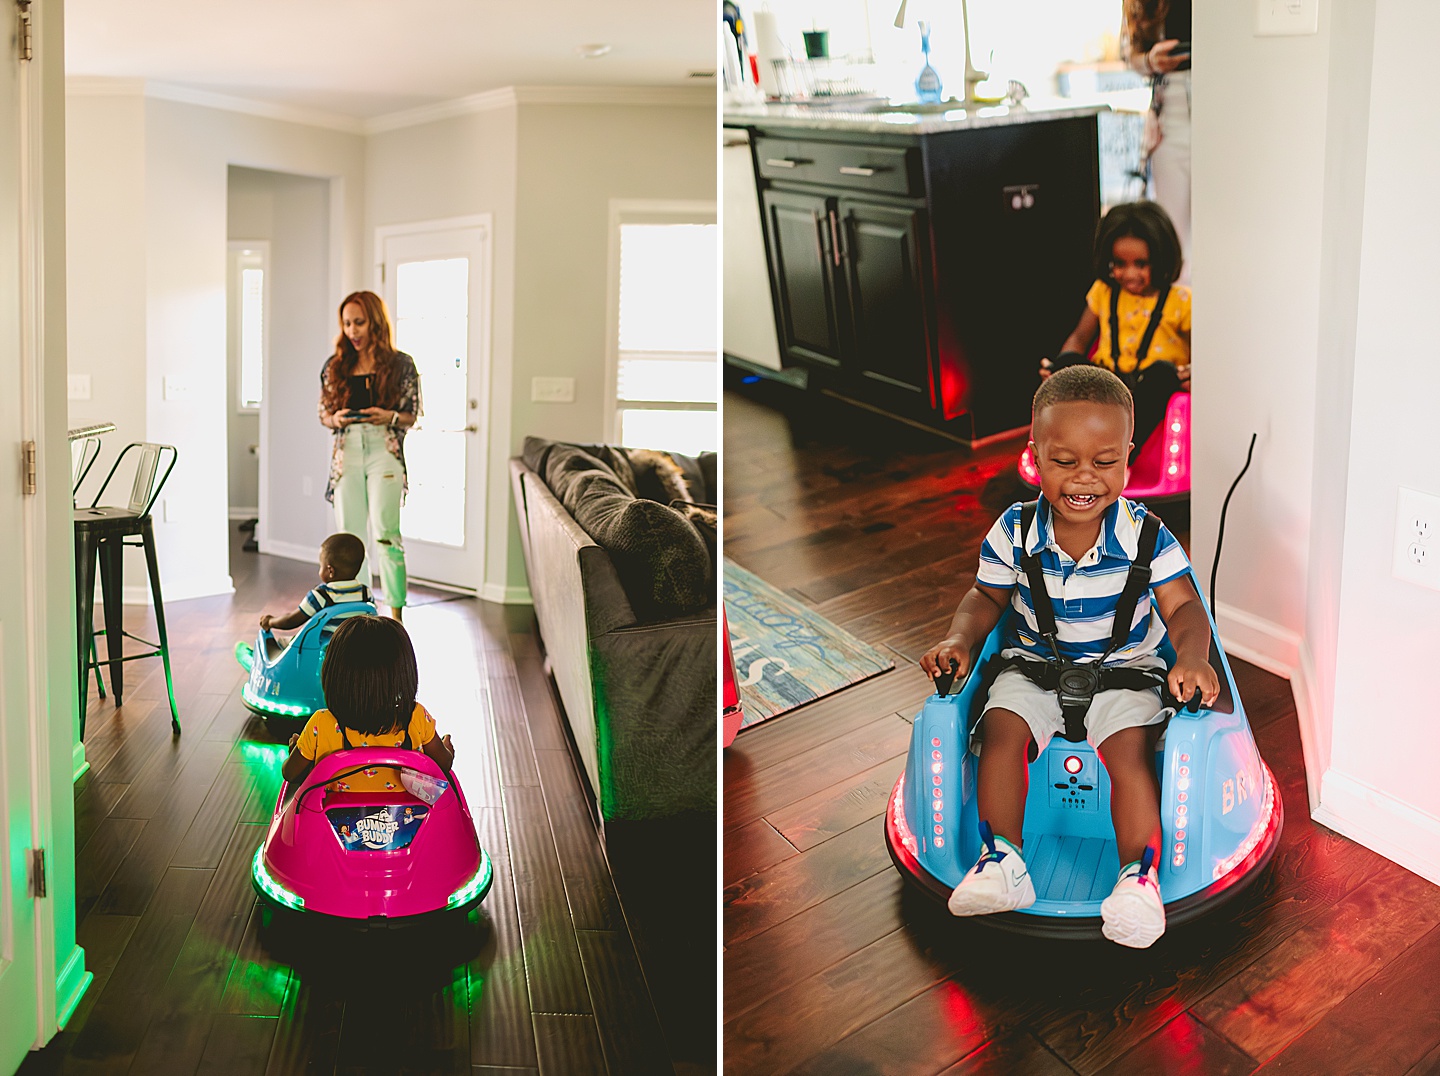 Kids riding go karts in the house